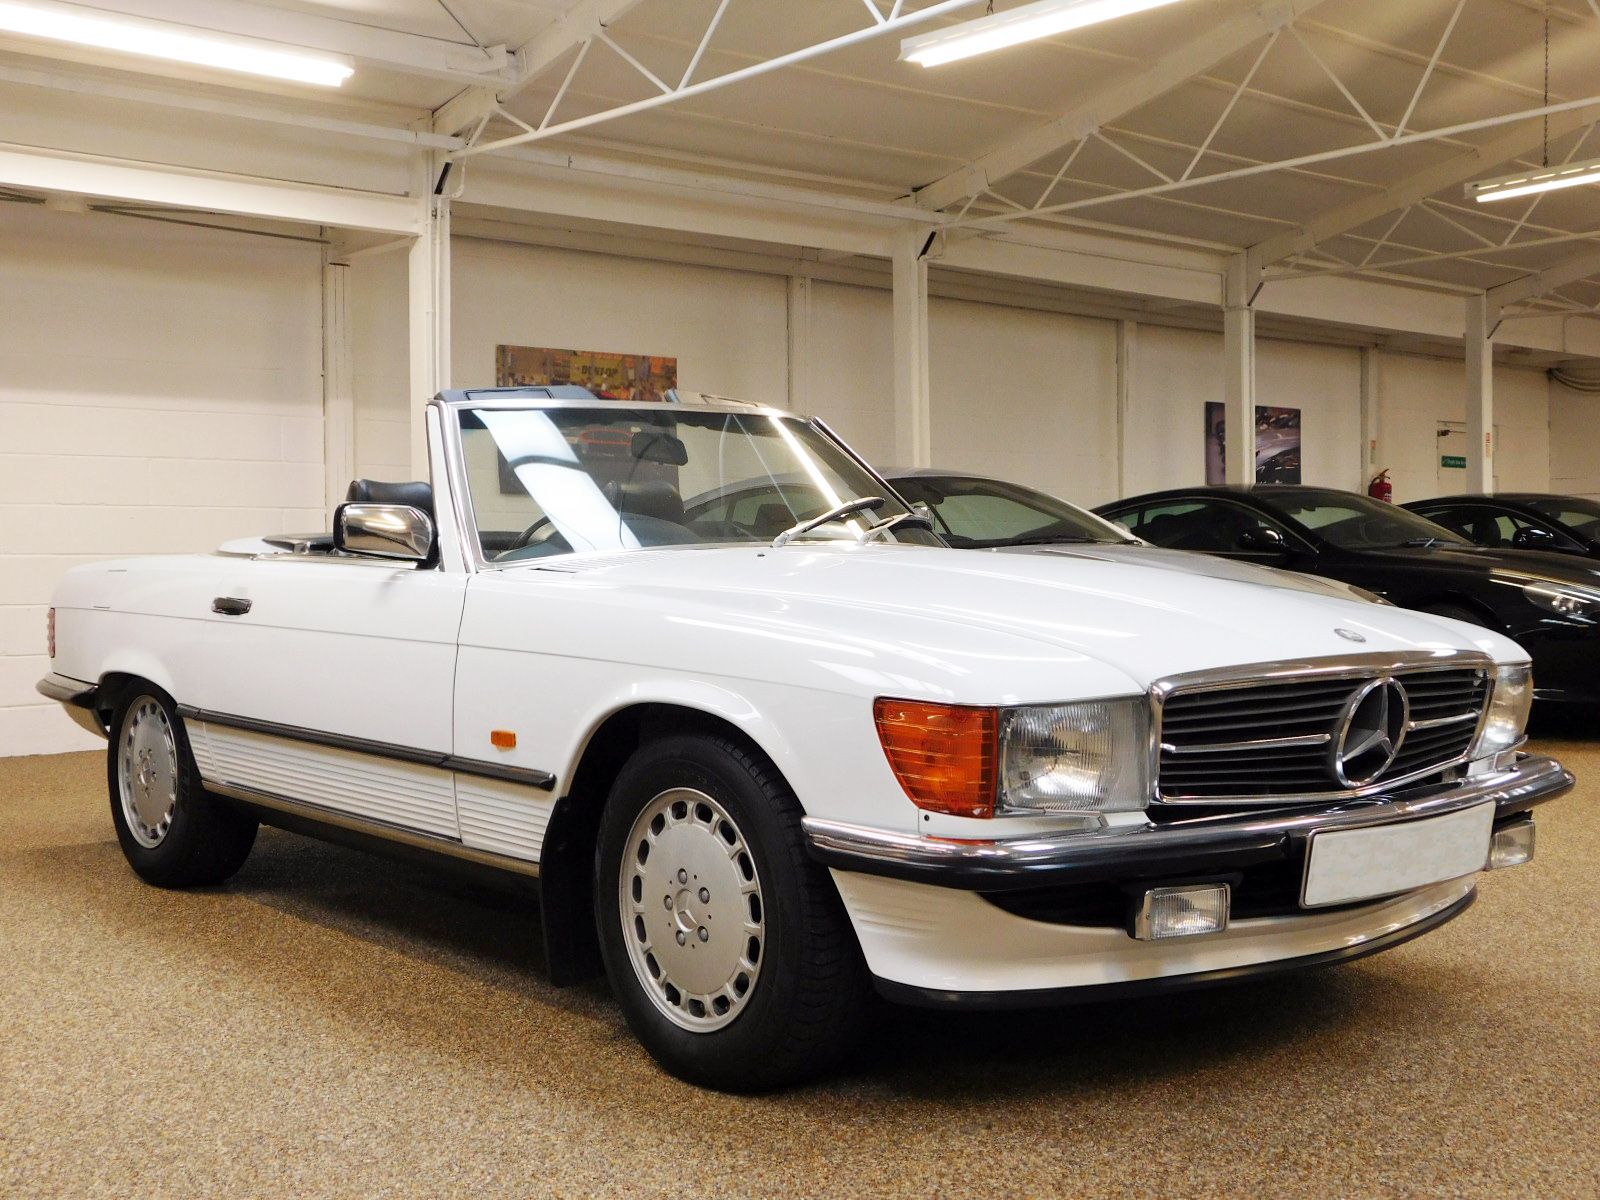 McGurk Performance Cars are pleased to offer this 300 SL. One Lady Owner From 1st August 1988 to 2016. Original Data Card And PDI Paperwork From 27-07-88. 18 Mercedes Benz Main Dealer Service Stamps Original Service Book. Last Serviced Mercedes Benz Stratford Upon Avon 2020. Every MOT From 3 Years Old to Date Documented As Follows: July 1991 16570 Miles. July 1992 20691 Miles. March 1993 21473 Miles. March 1994 24052 Miles. April 1995 25175 Miles. May 1996 26183 Miles. April 1997 27754 Miles. April 1998 28150 Miles. March 1999 28992 Miles. April 2000 29573 Miles. May 2001 30062 Miles. April 2002 30374 Miles. March 2003 30739 Miles. July 2004 31614 Miles. August 2005 32099 Miles. July 2006 32494 Miles. July 2007 32729 Miles. July 2008 32891 Miles. July 2009 33040 Miles. July 2010 33104 Miles. July 2011 33248 Miles. July 2012 33361 Miles. July 2013 33488 Miles. July 2014 33523 Miles. August 2015 33558 Miles. August 2016 34343 Miles. August 2017 34502 Miles August 2018 34560 Miles Only 2 Mot Advisories To Date As Follows: Slightly Blocked Washer Jets. Slight Exhaust Blow, Renewed By Mercedes Benz. Original Tool Kit And Hand Books Including Leather Wallet. X4 Michelin Factory Tyres. Full Black leather Interior. Rear Seating. Original Fire Extinguisher. Spare Wheel & Tyre Unused. Original Number Plates From 1988 Macclesfield Mercedes Benz. Electric Windows. Front Fog Lights. Original Black Mohair Soft Top. White Factory Fitted Hard Top. Immaculate Unmarked Condition Throughout. Very Rare To Source In This Immaculate Unrestored Condition. Original Factory Paintwork And Wax Oil. A Perfect Example For Increasing Investment Potential Or Show Vehicle.